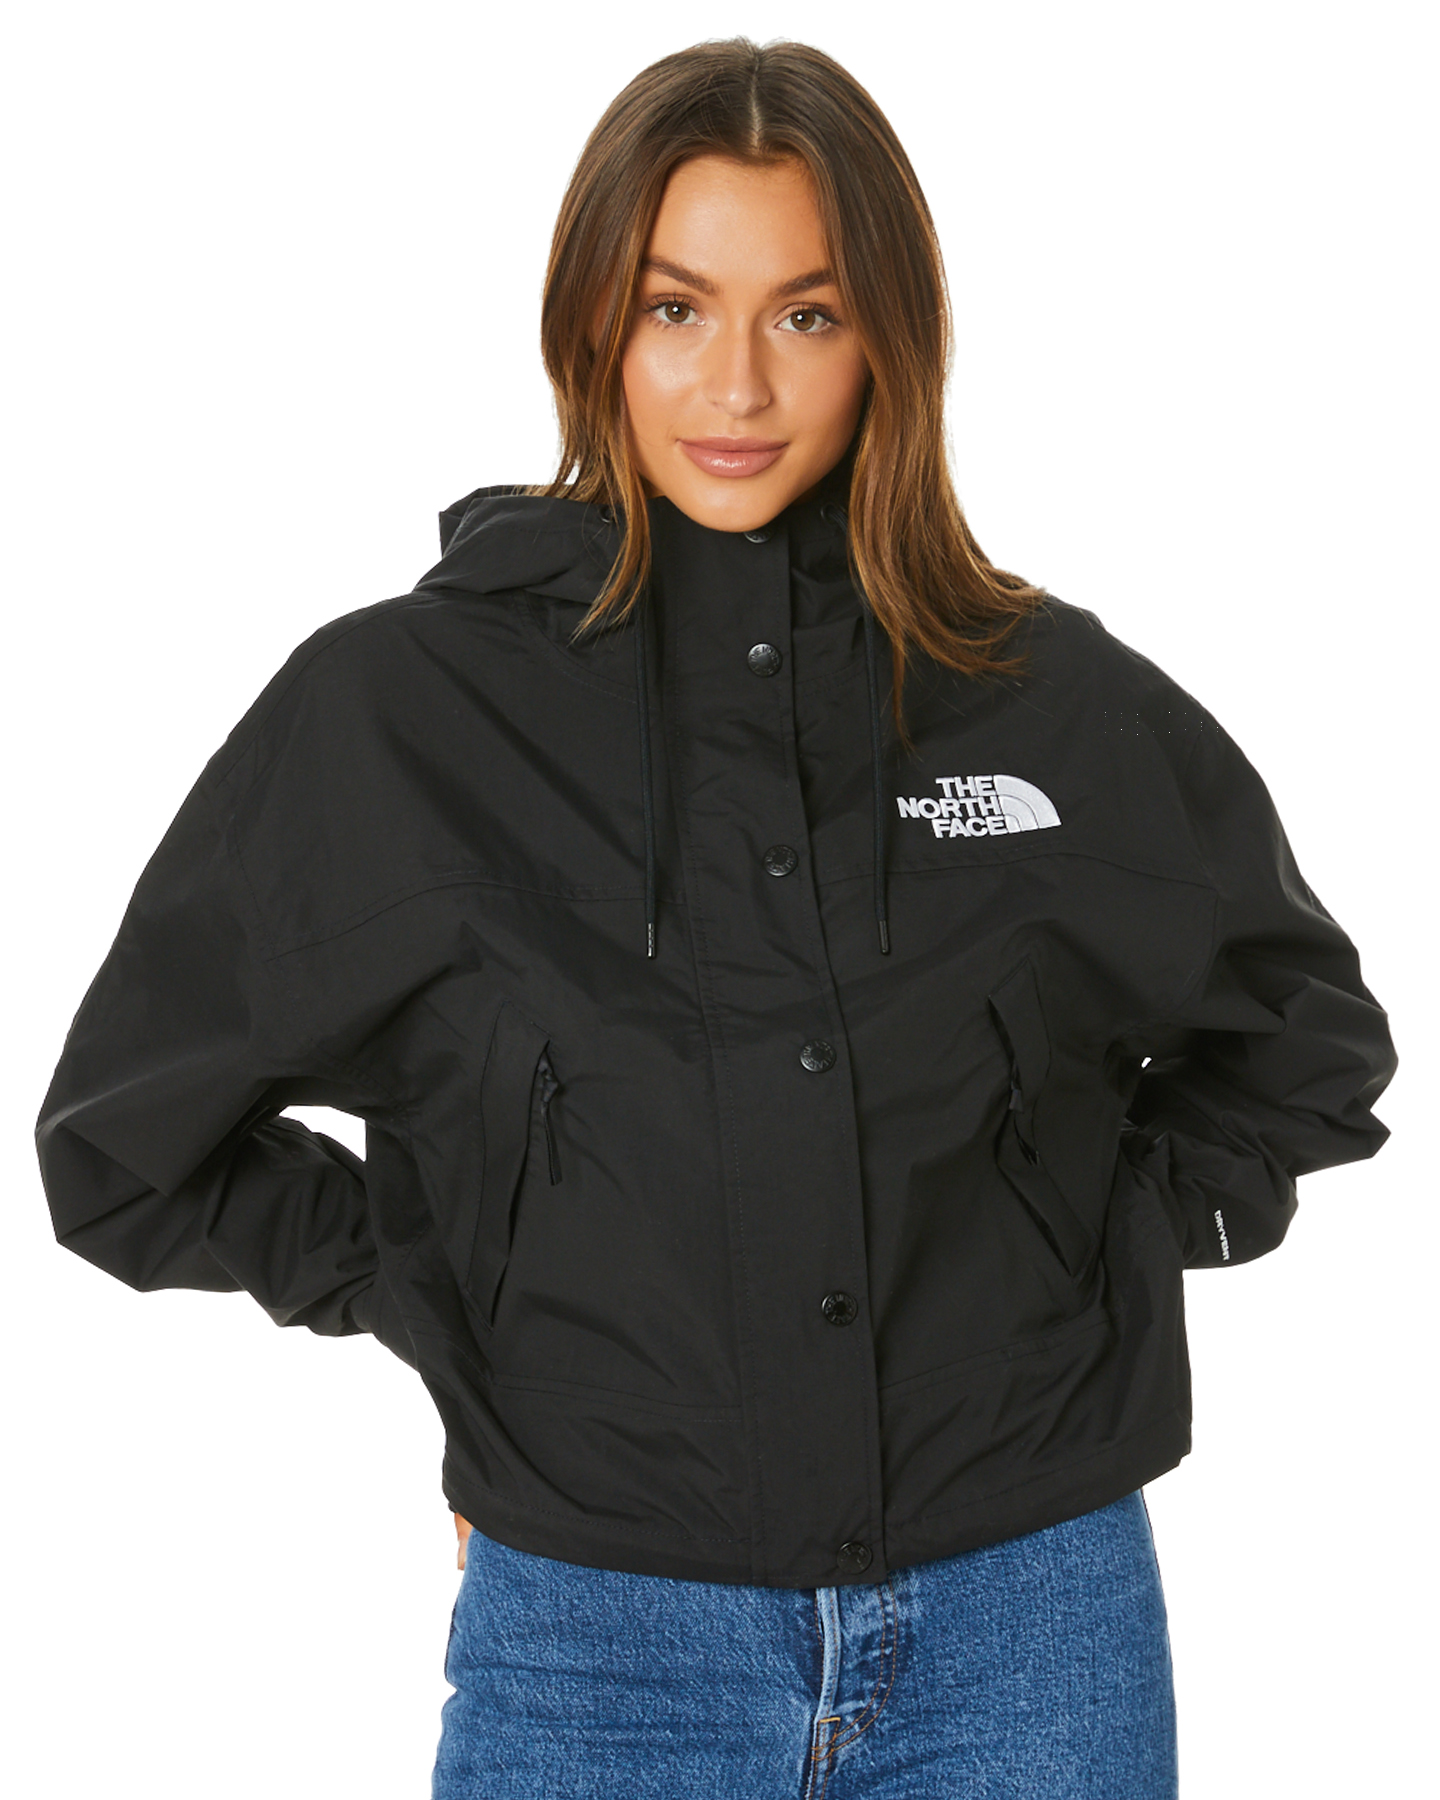 north face clothing Online shopping has 